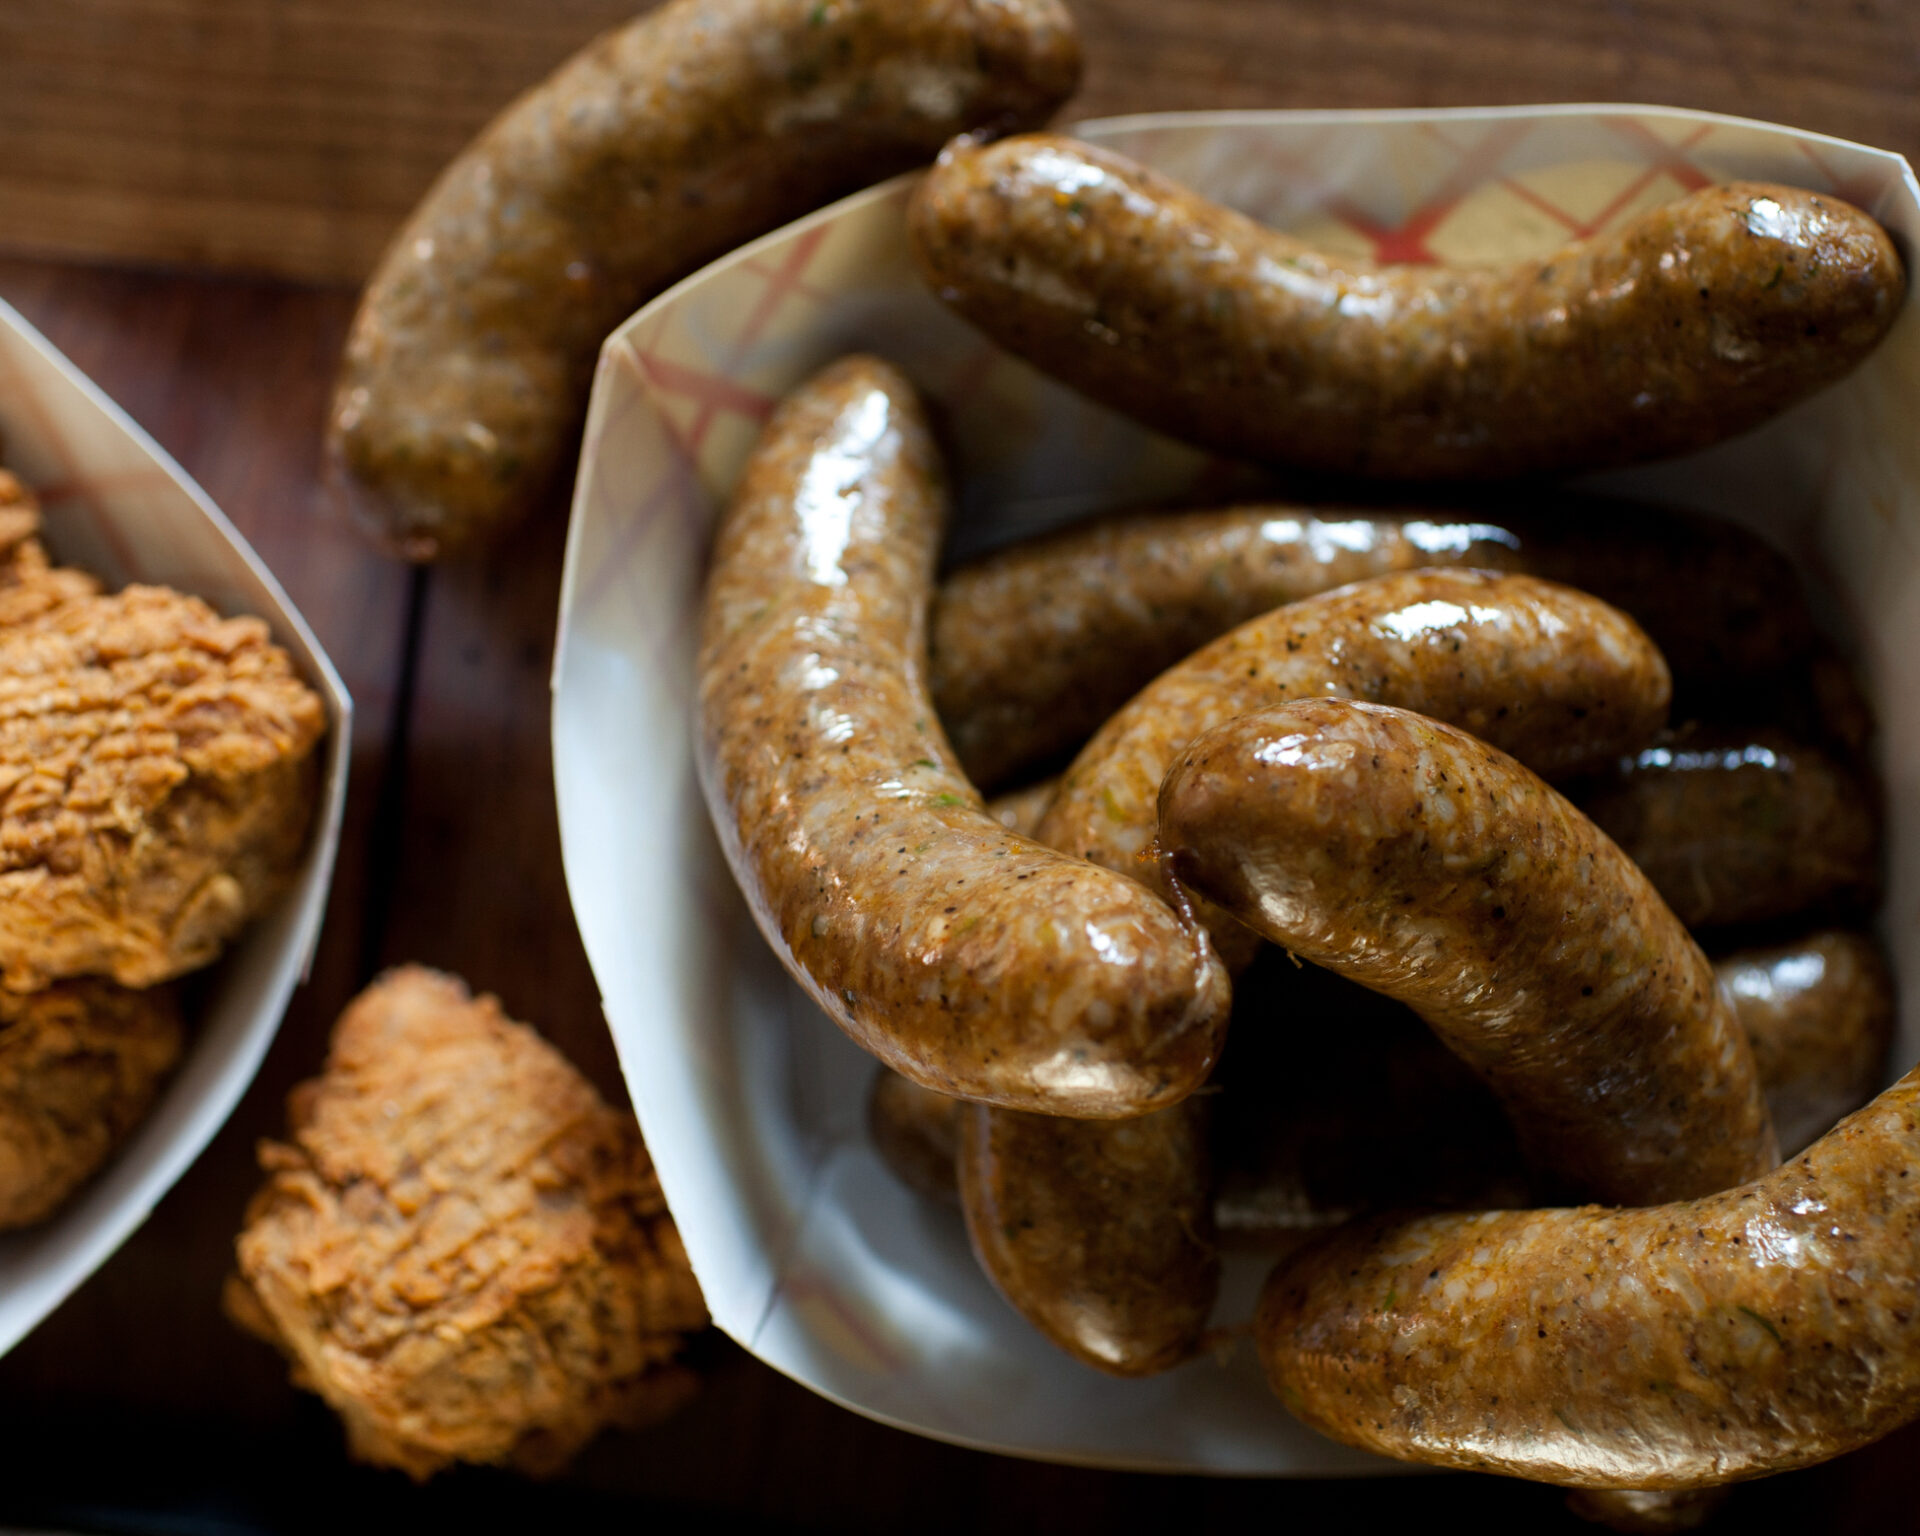 a basket full of brown Cajun sausages called boudin Lafayette, Louisiana